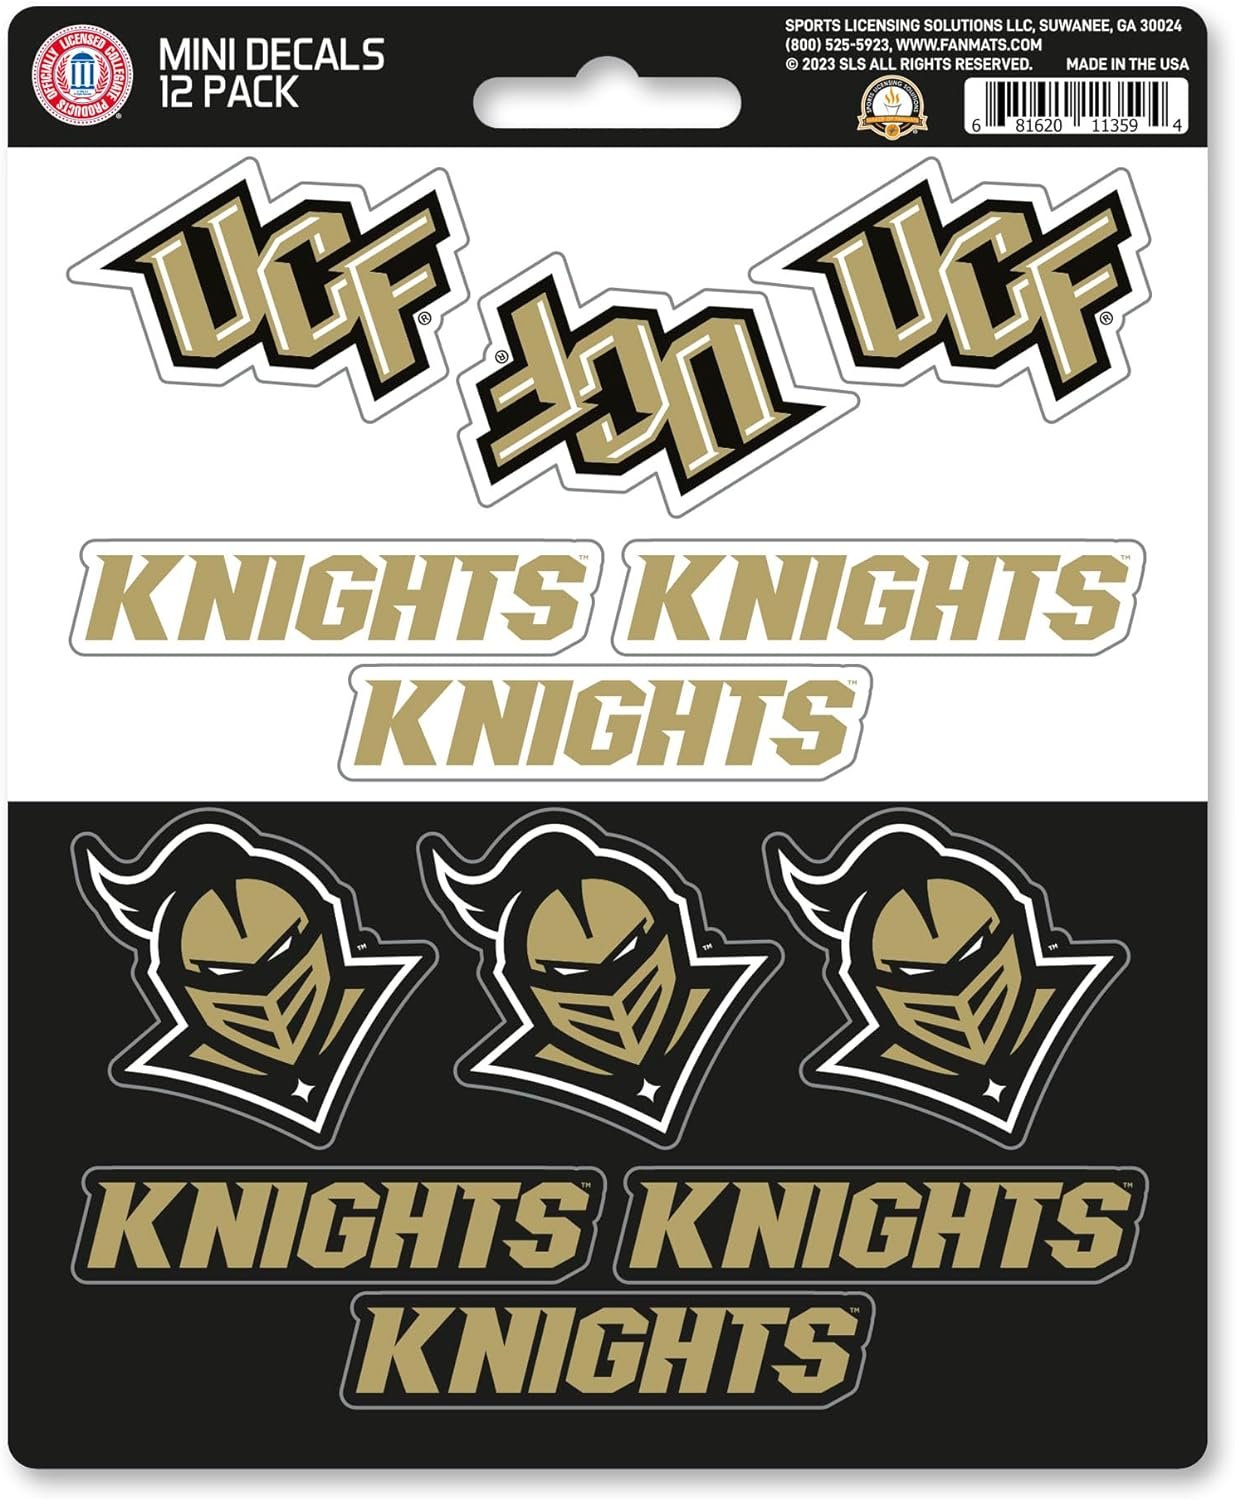 University of Central Florida UCF Knights 12-Piece Mini Decal Sticker Set, 5x6 Inch Sheet, Gift for football fans for any hard surfaces around home, automotive, personal items